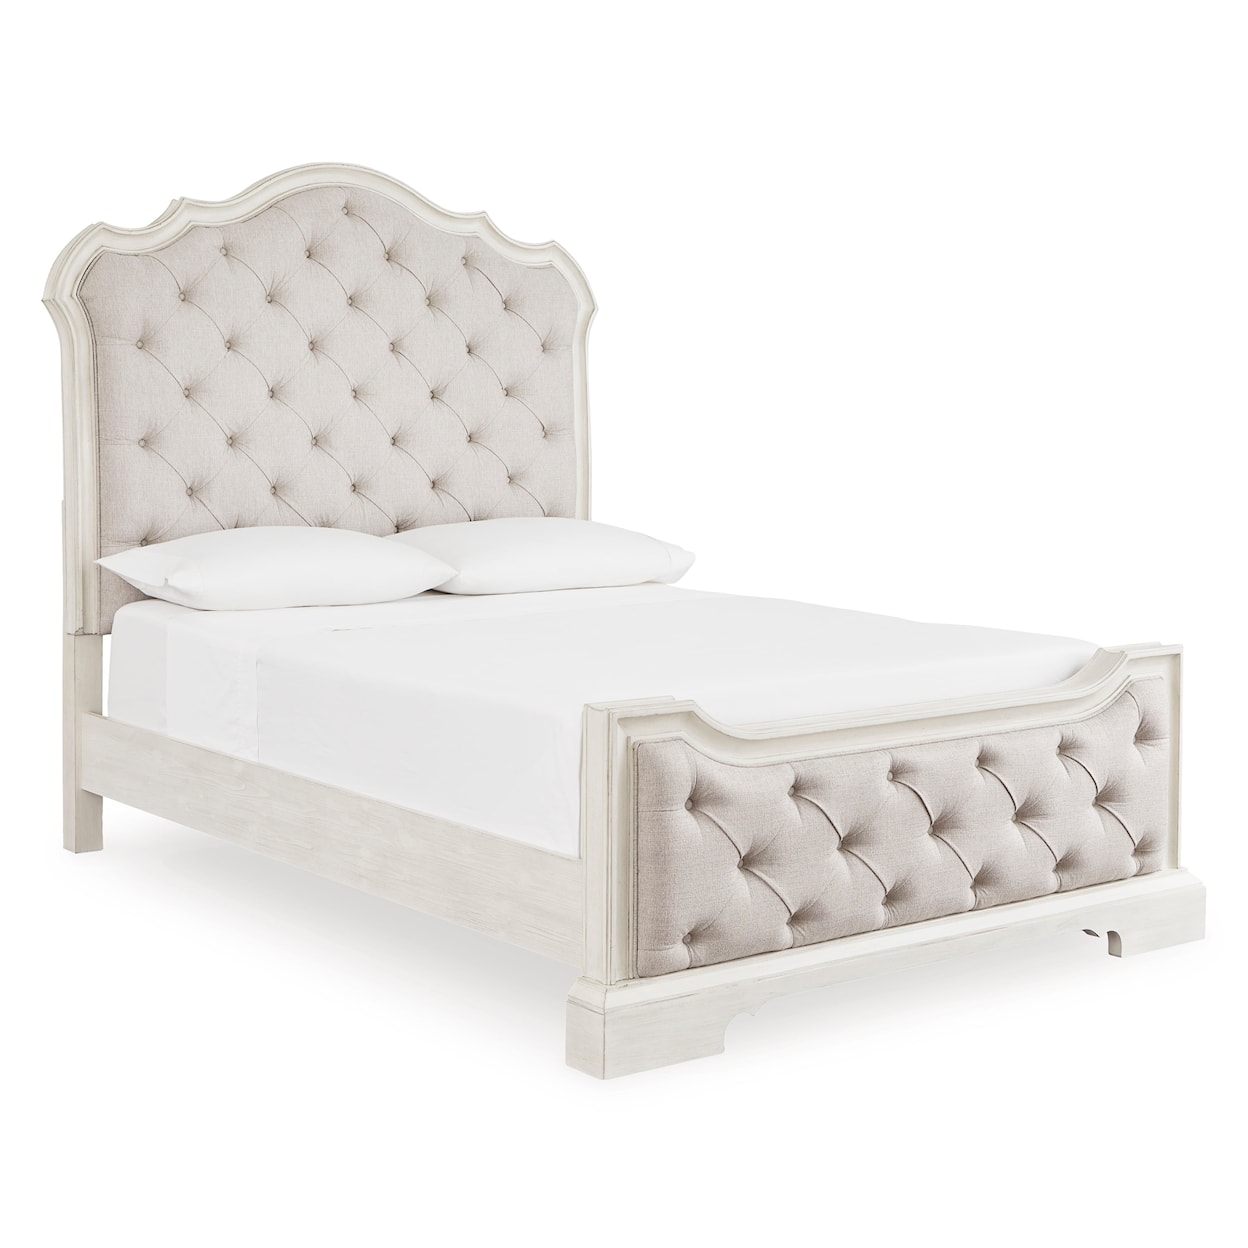 Signature Design by Ashley Arlendyne Queen Bed